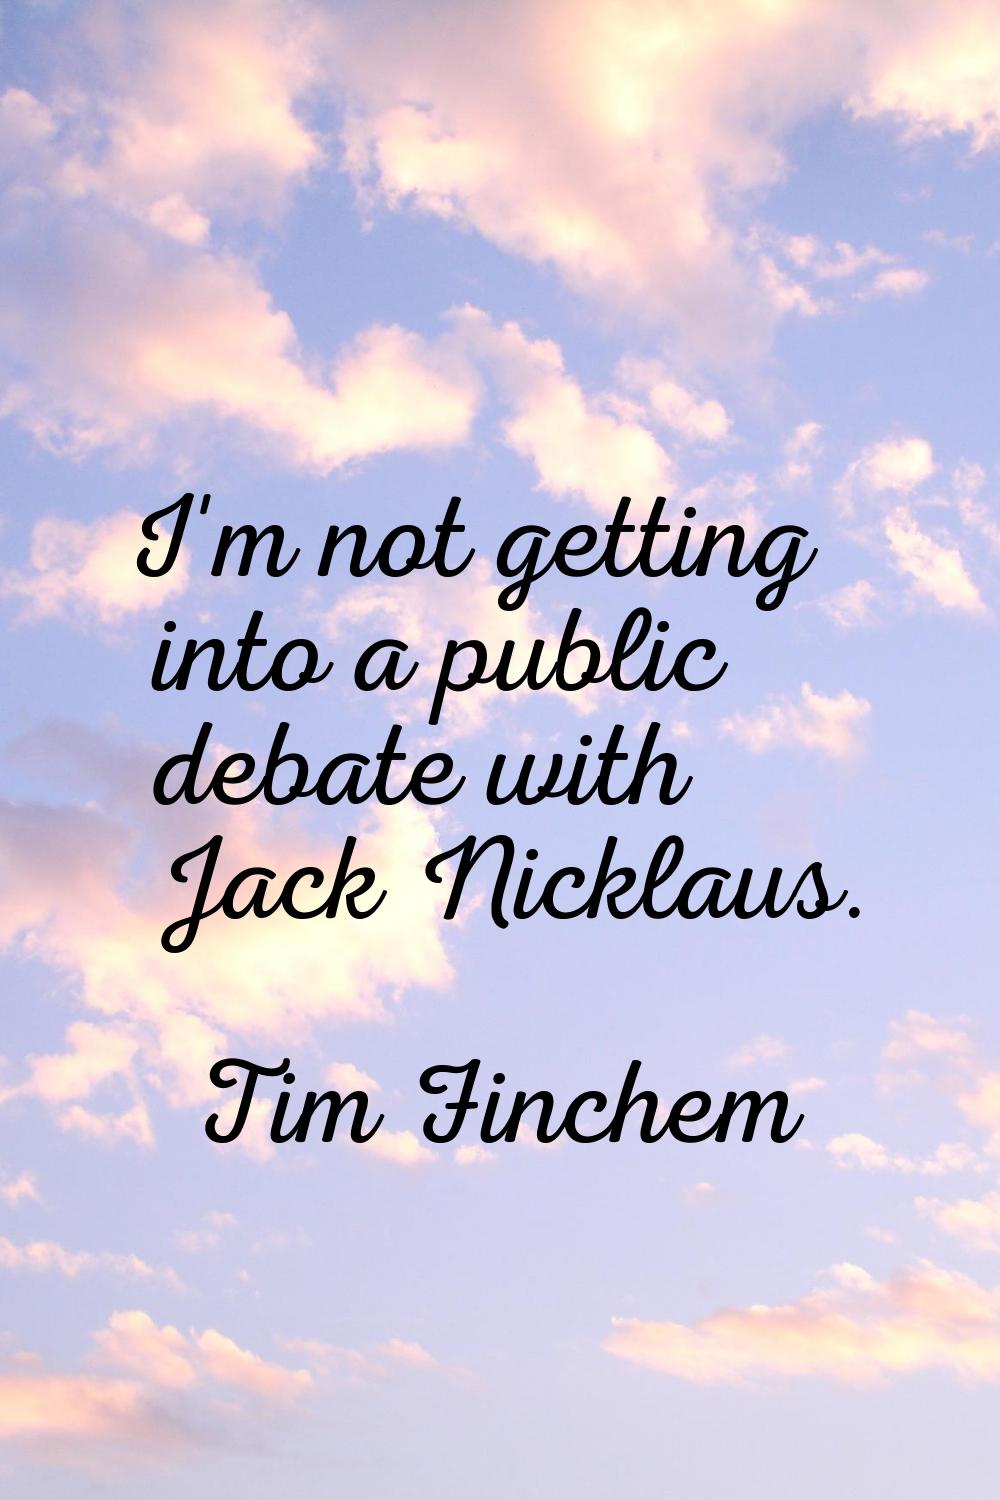 I'm not getting into a public debate with Jack Nicklaus.